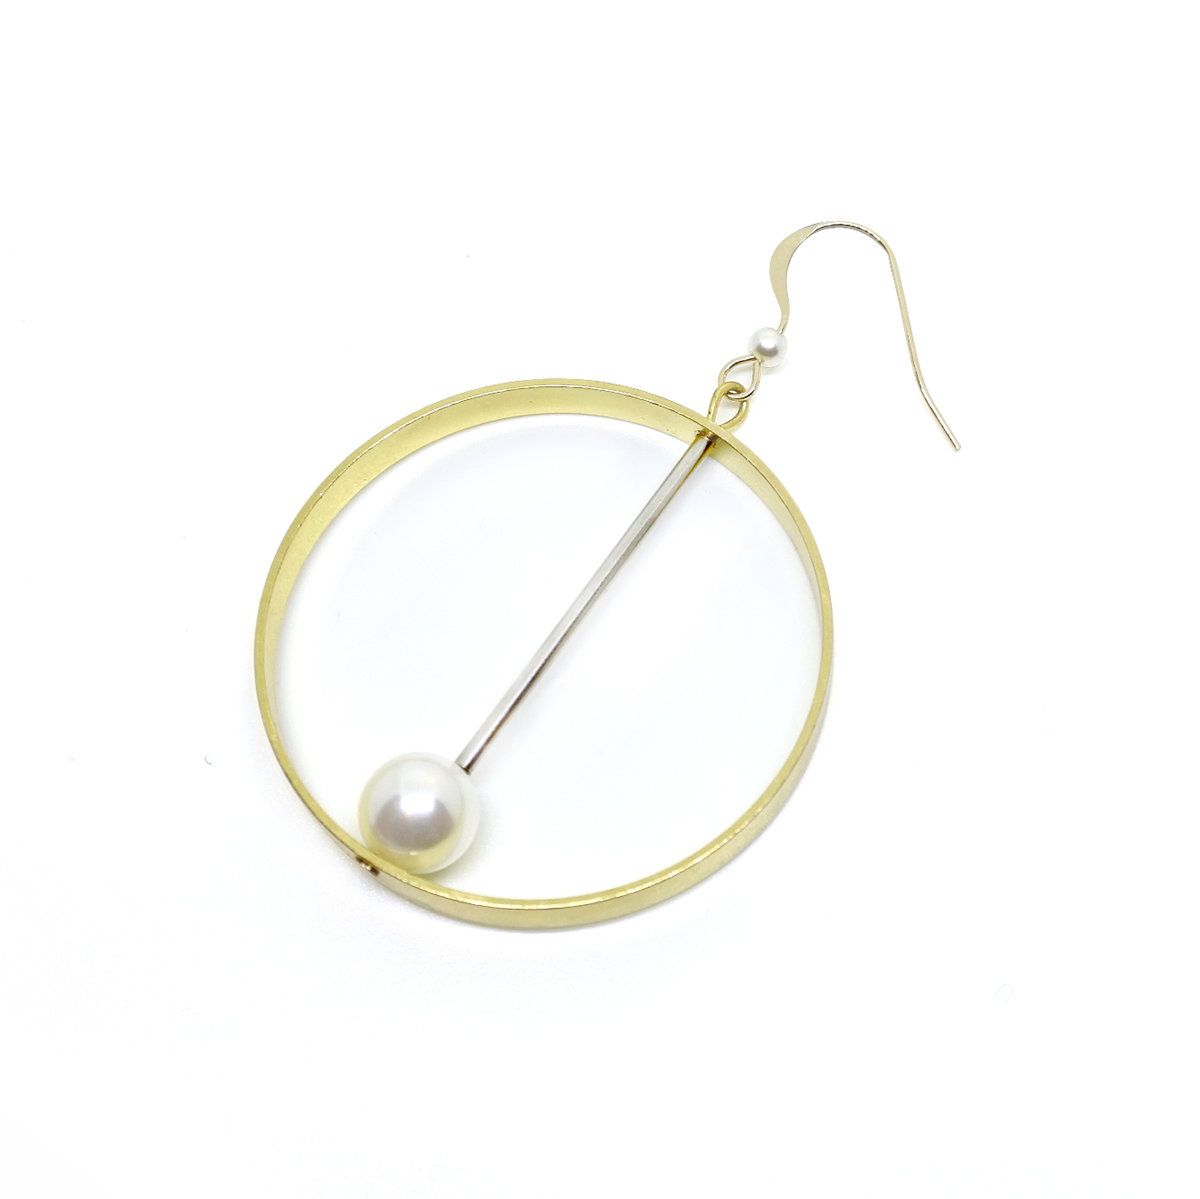 Asymmetrical earring — designer shop, Gifts For Her, Fashion Accessories 